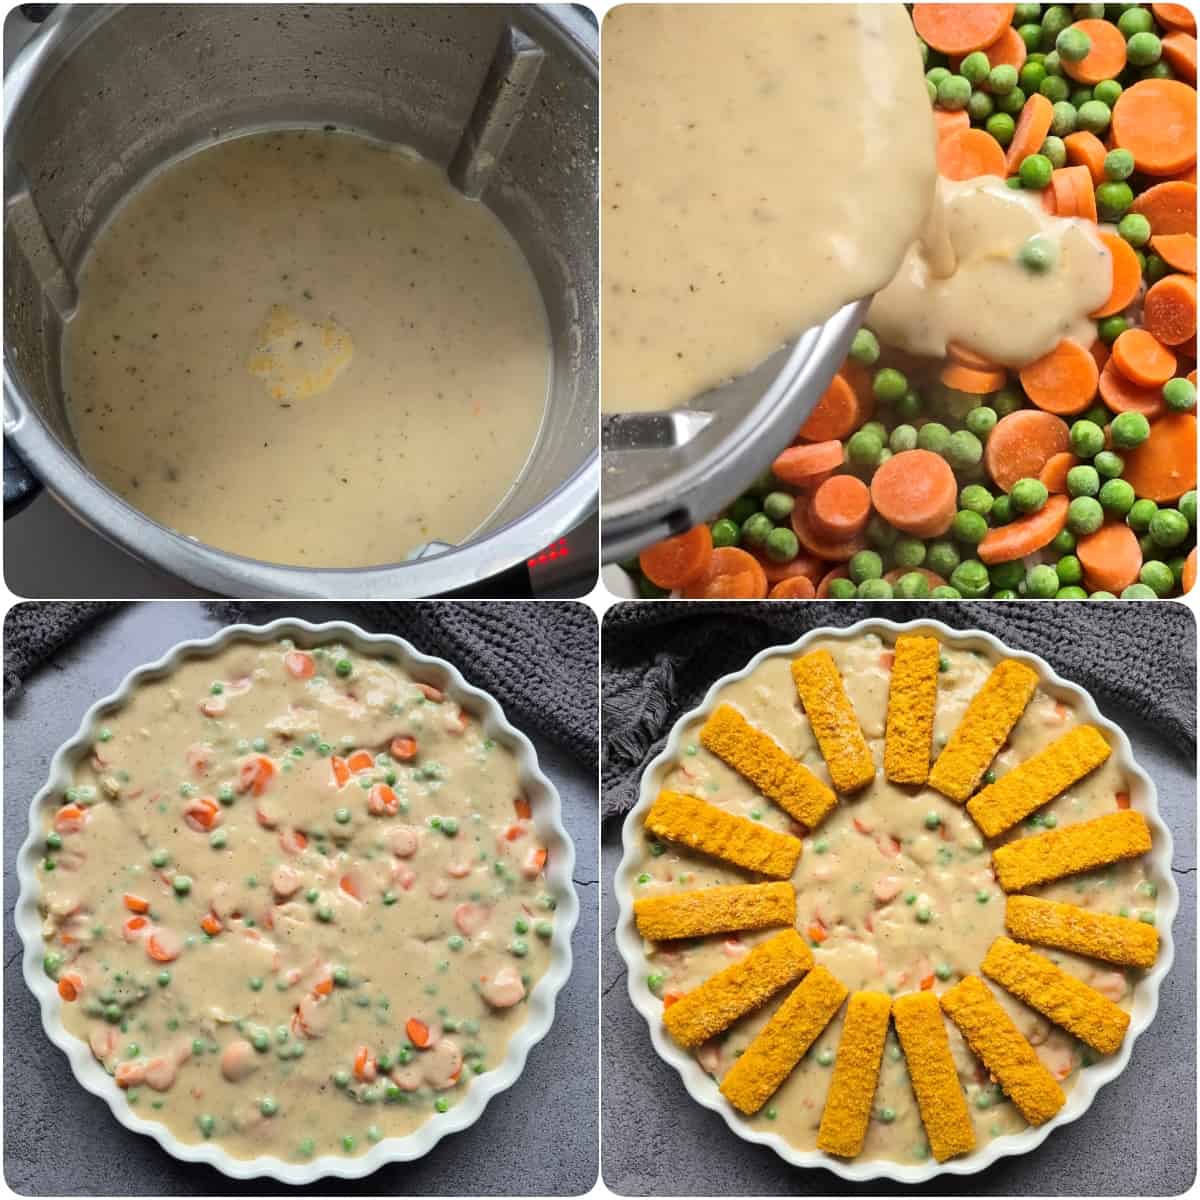 A collage of the preparation steps for the fish sticks casserole.